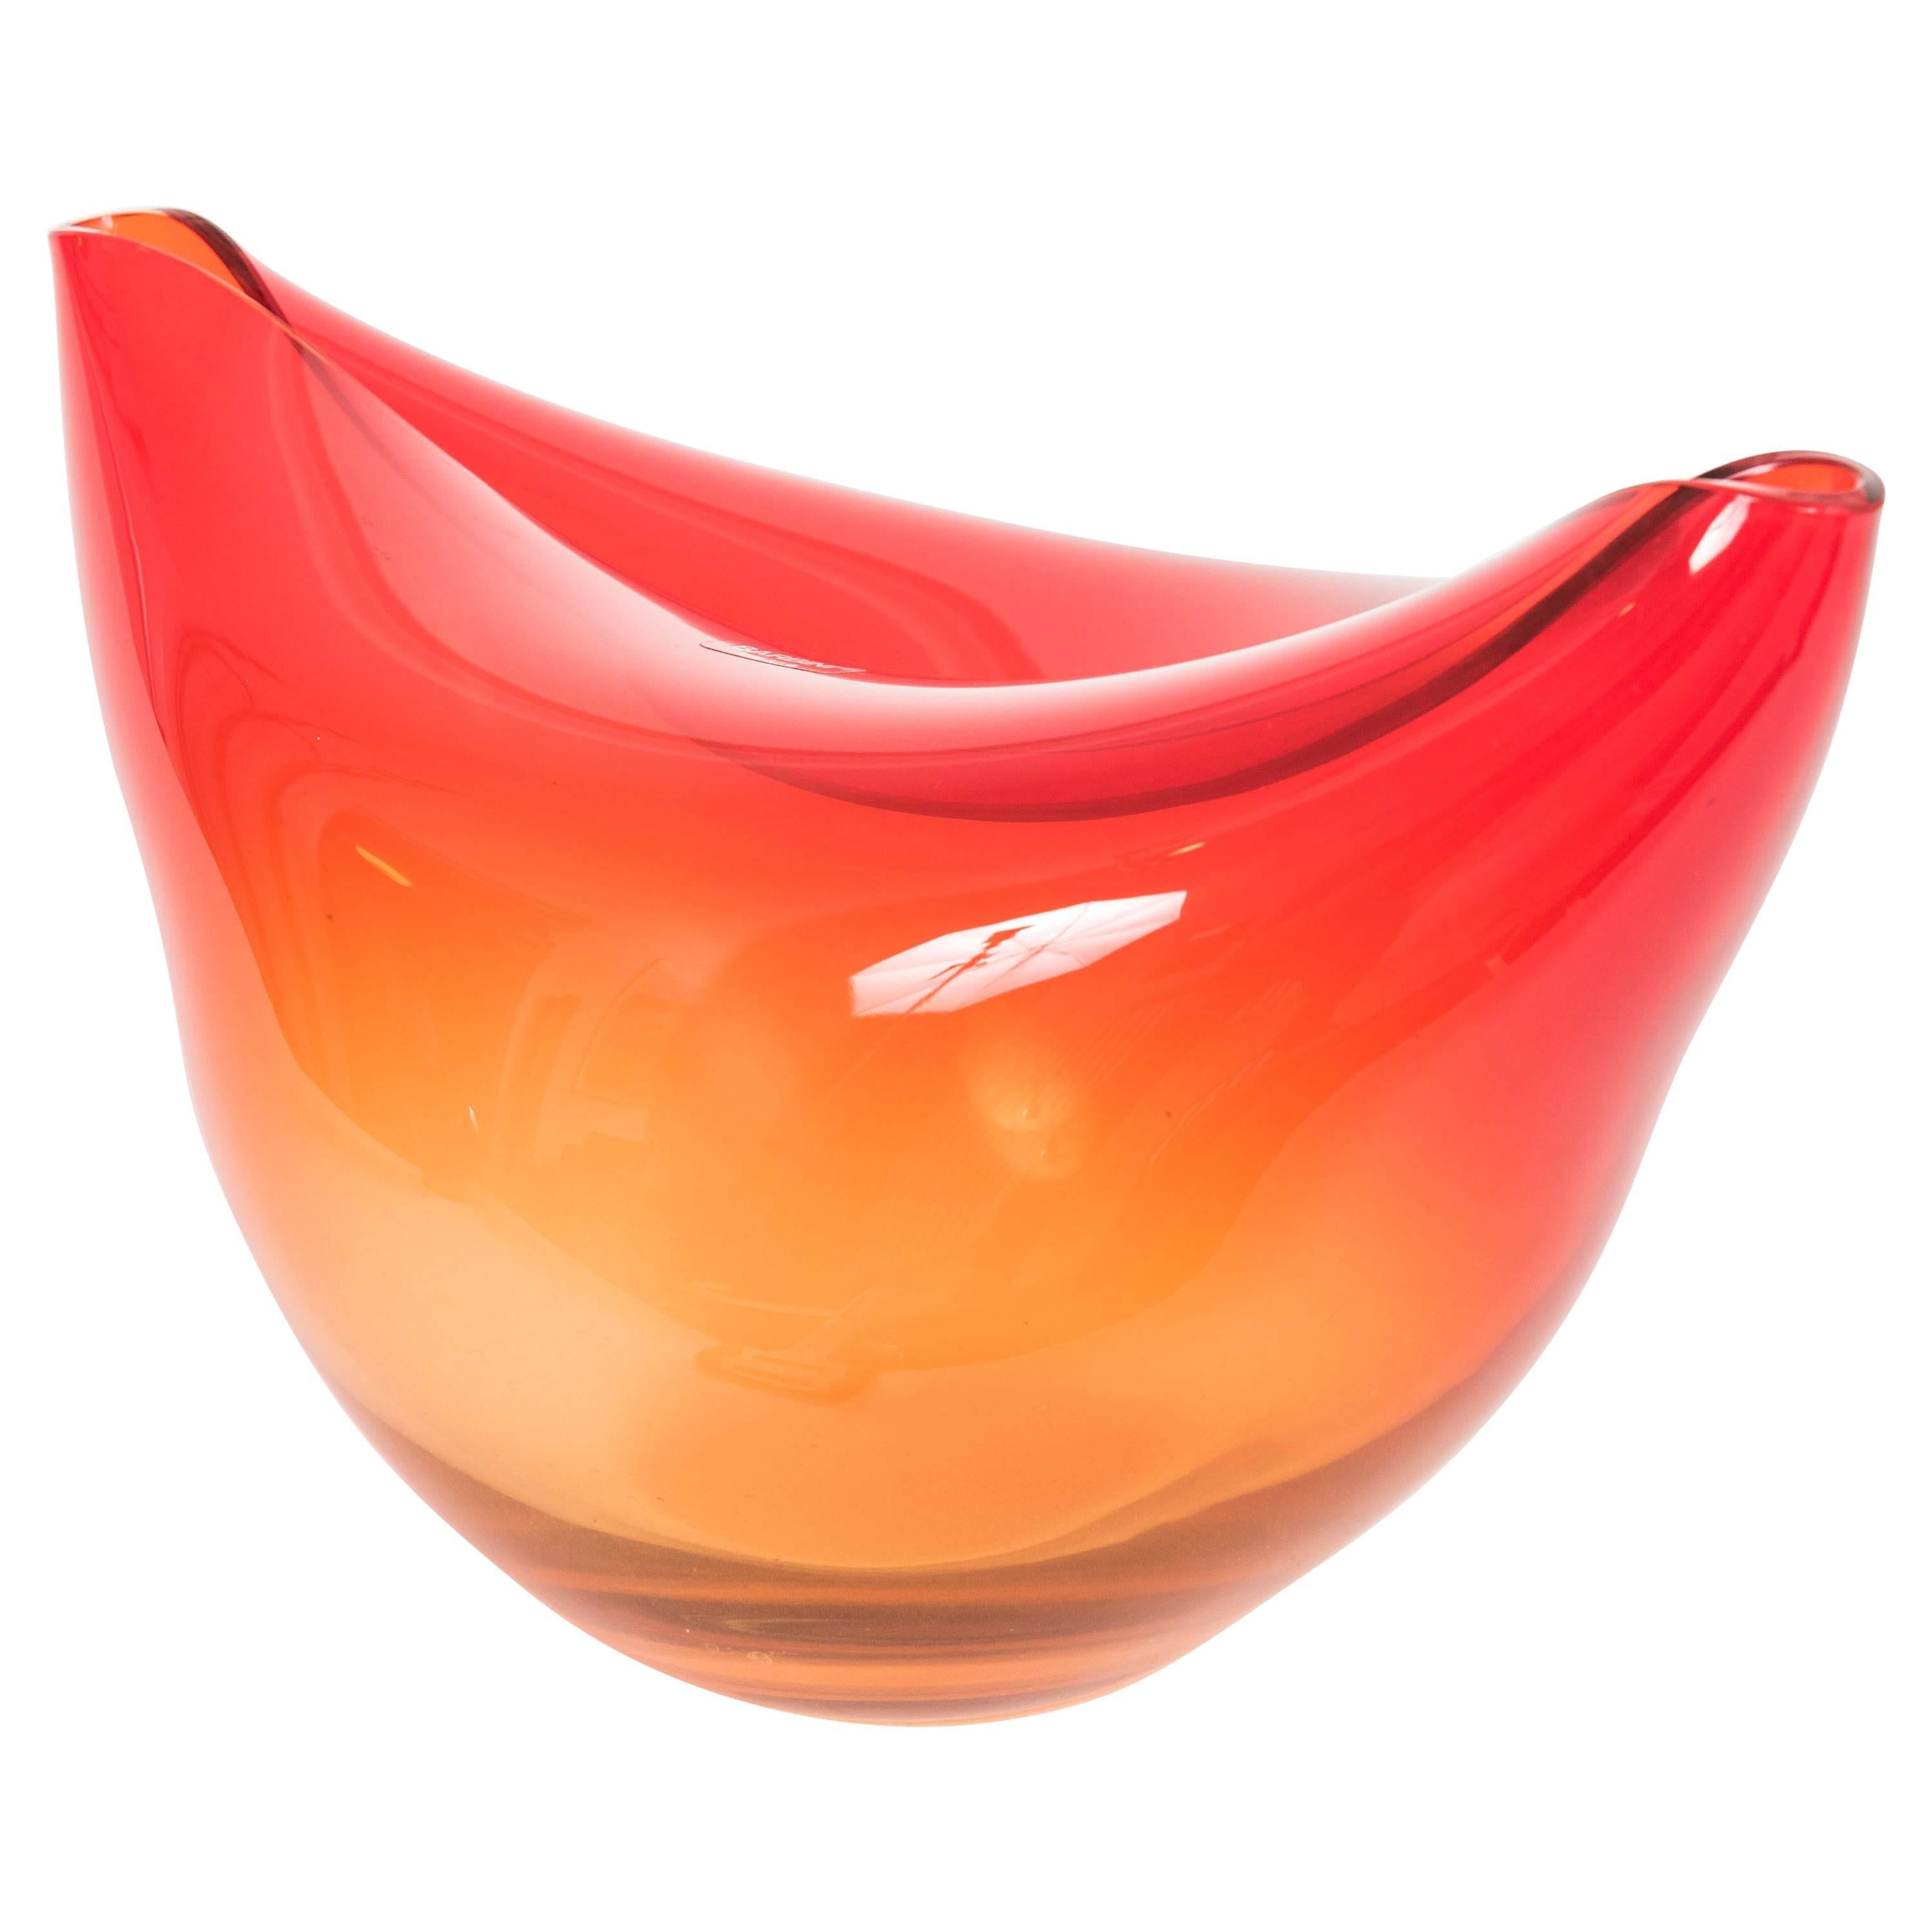 Orange glass vase organically shaped with folded sides. Engraved signature and paper label.